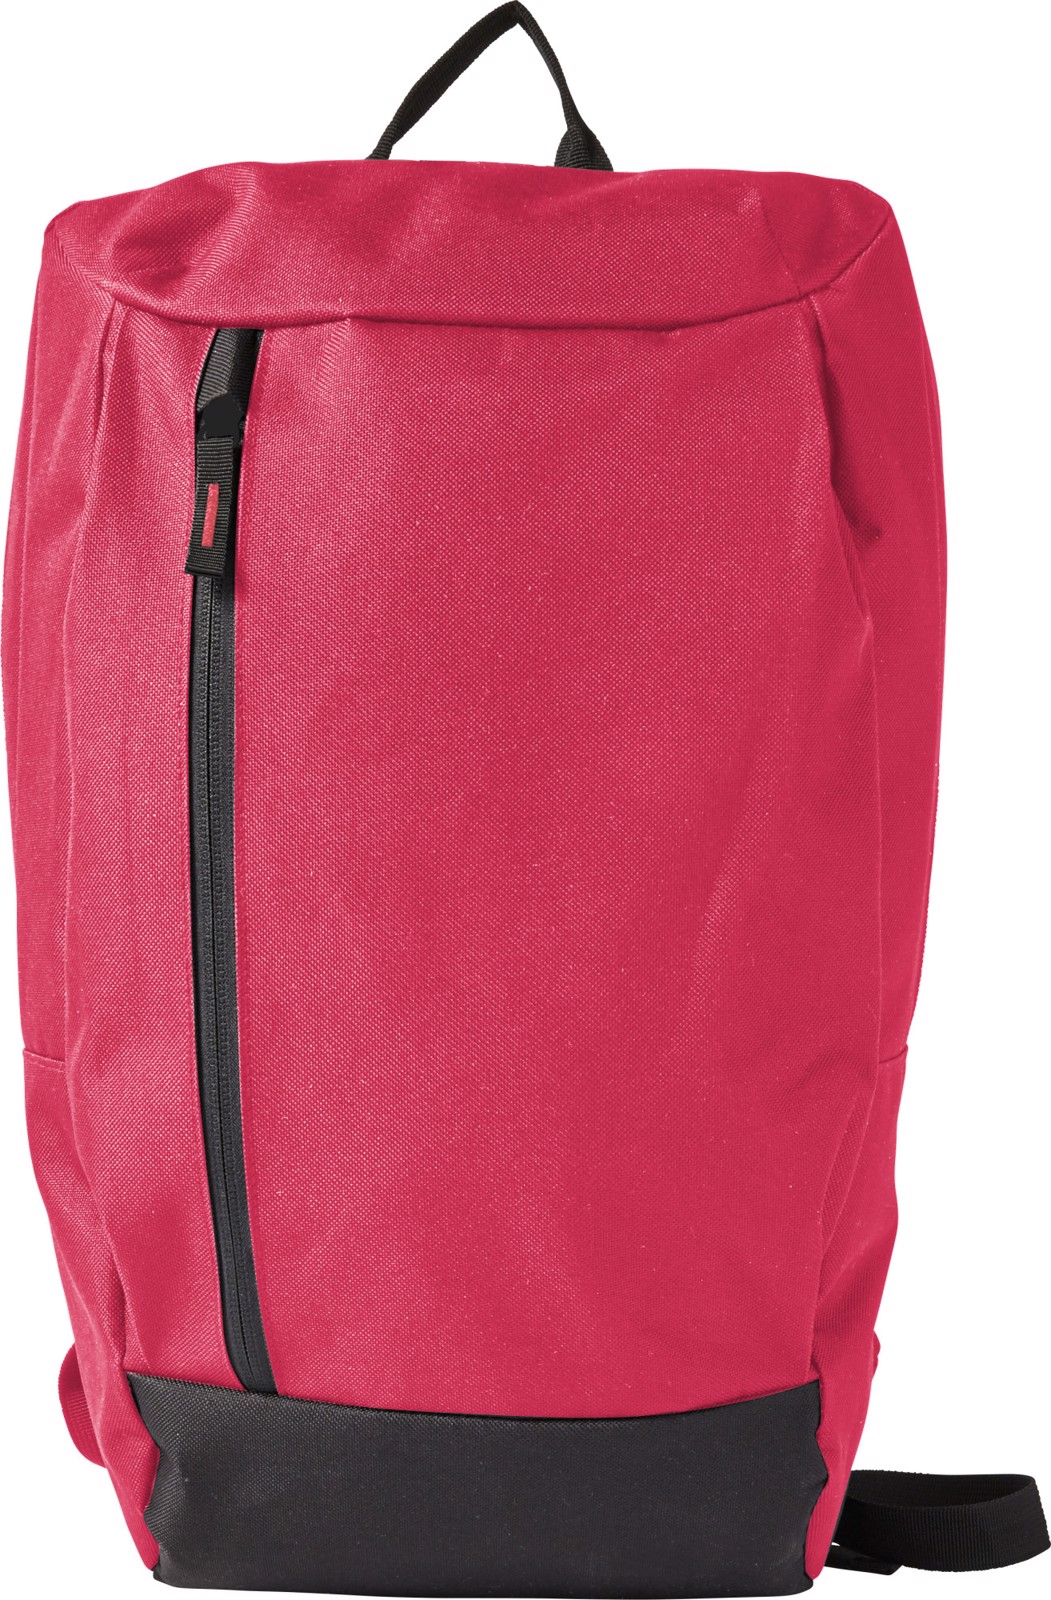 Polyester (600D) backpack - Red